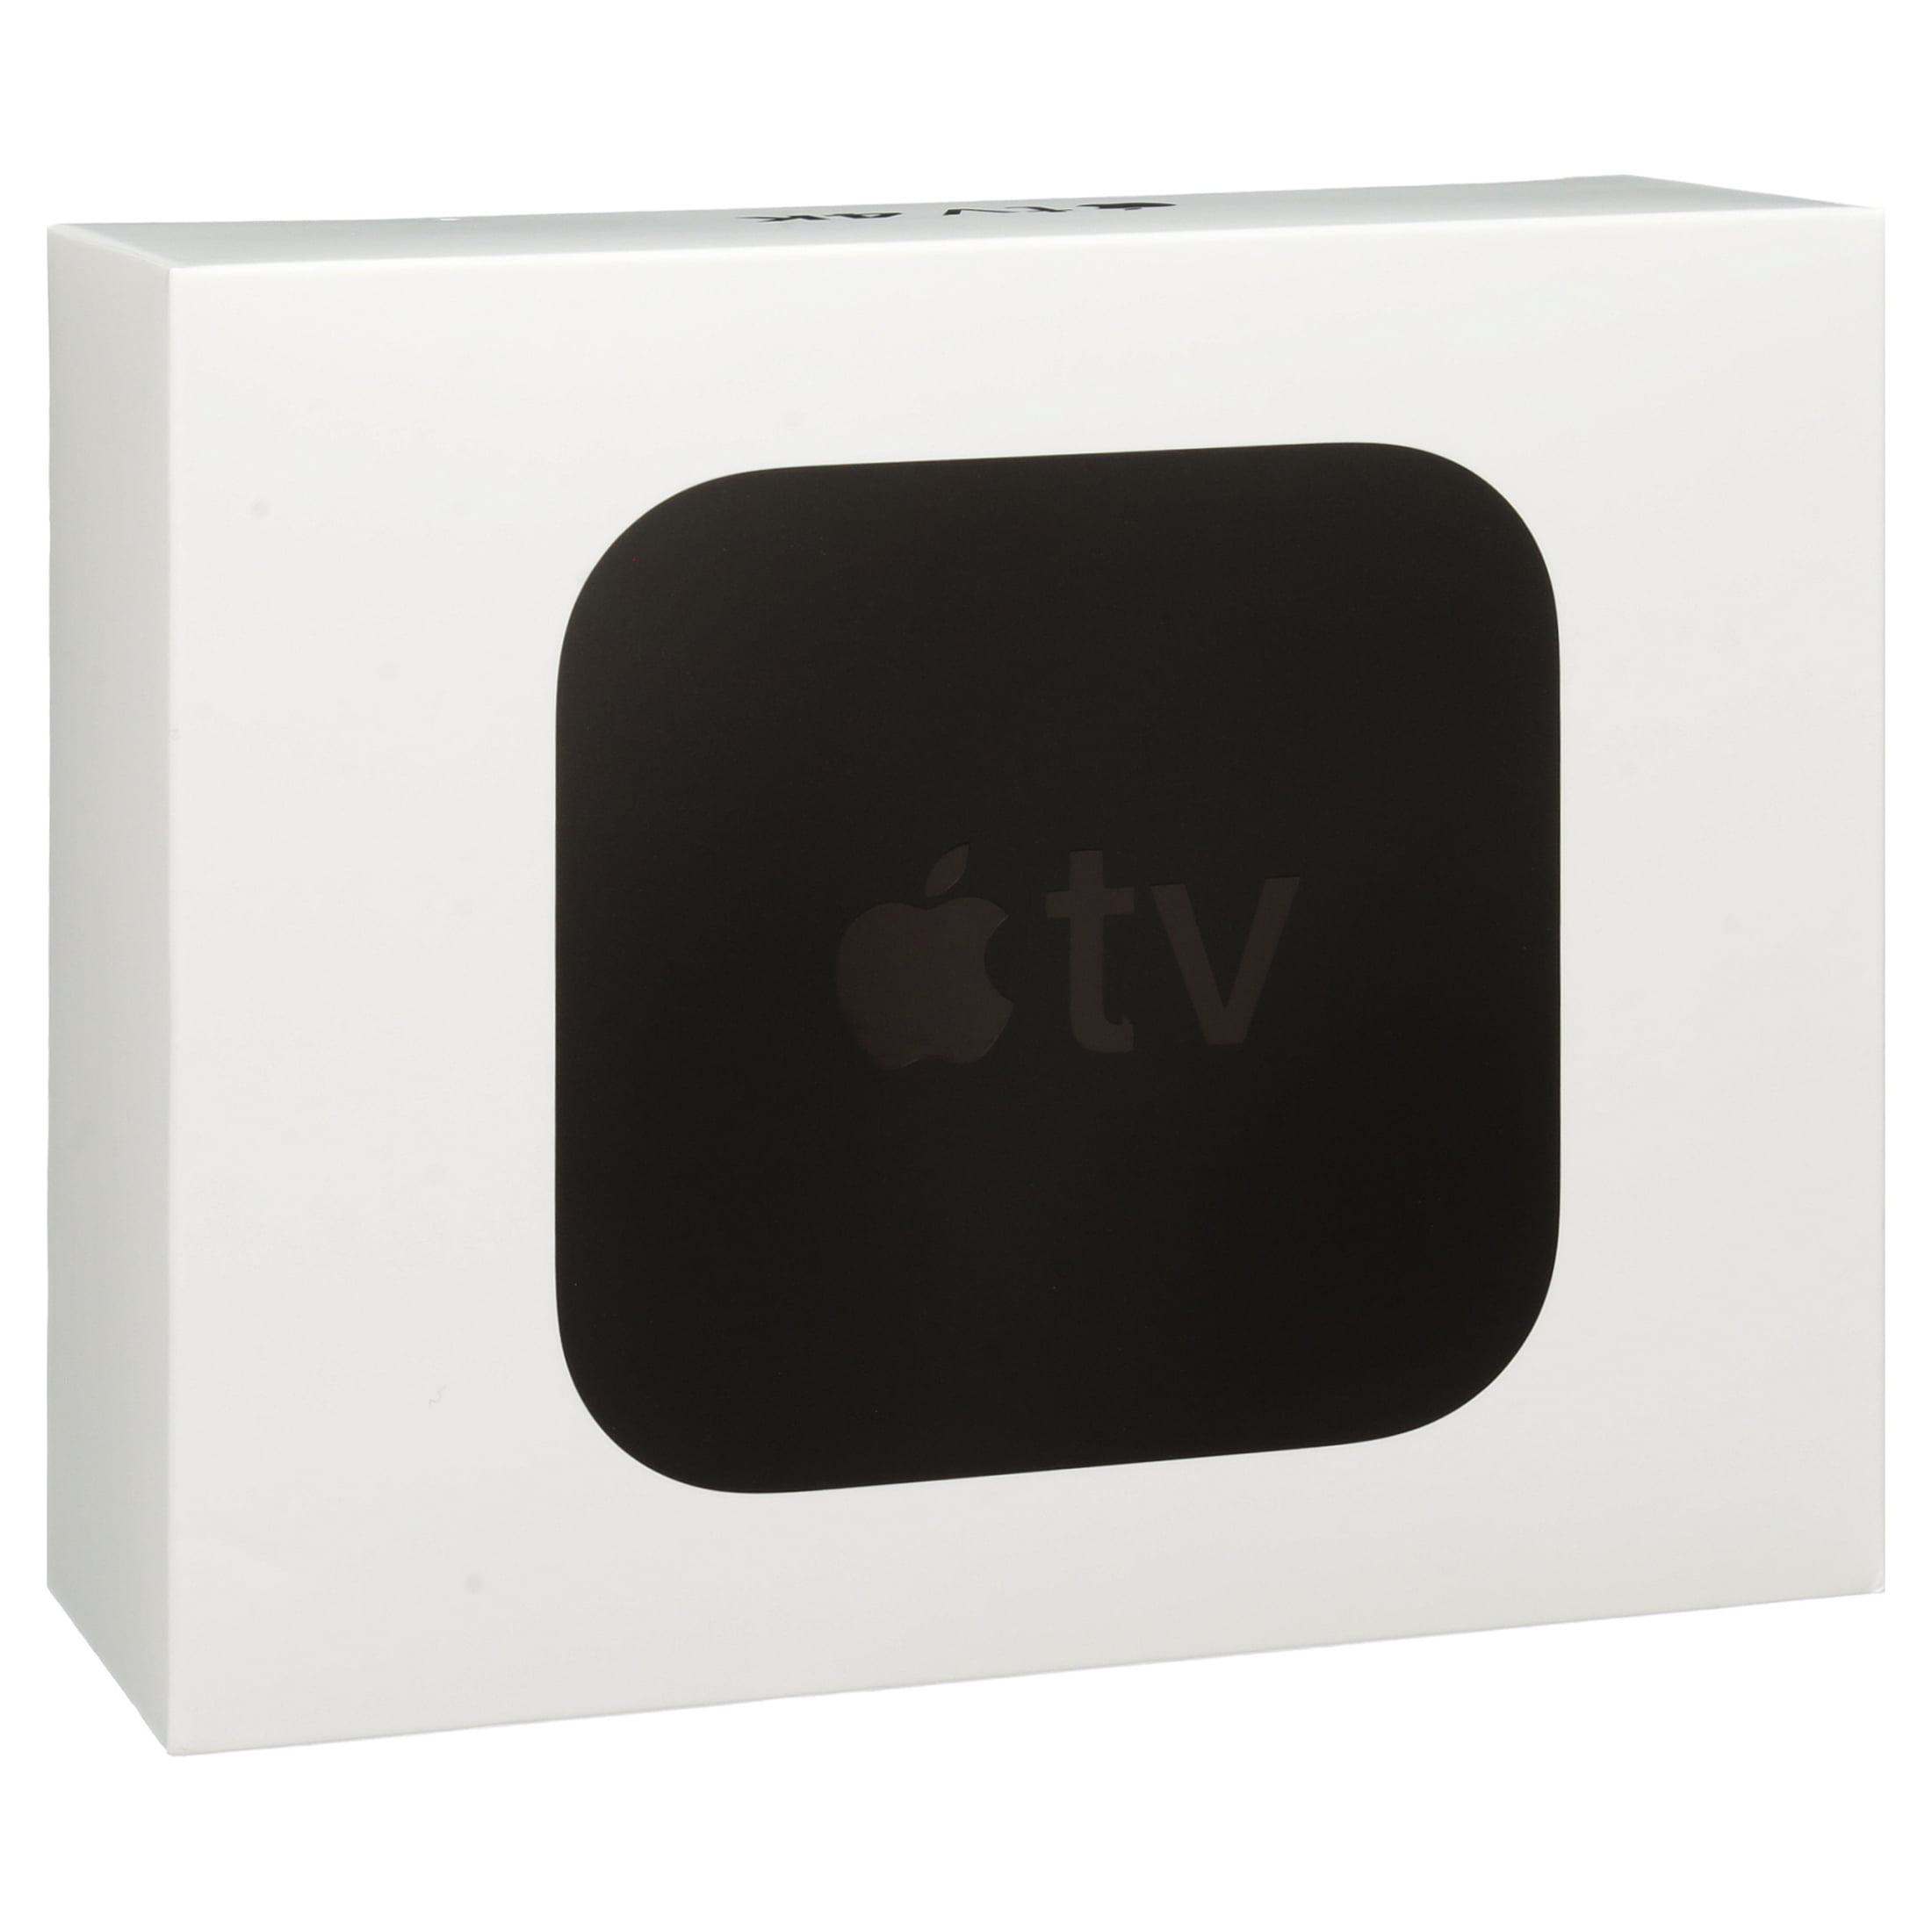 Physical Hd Apple Tv Show Wallpapers